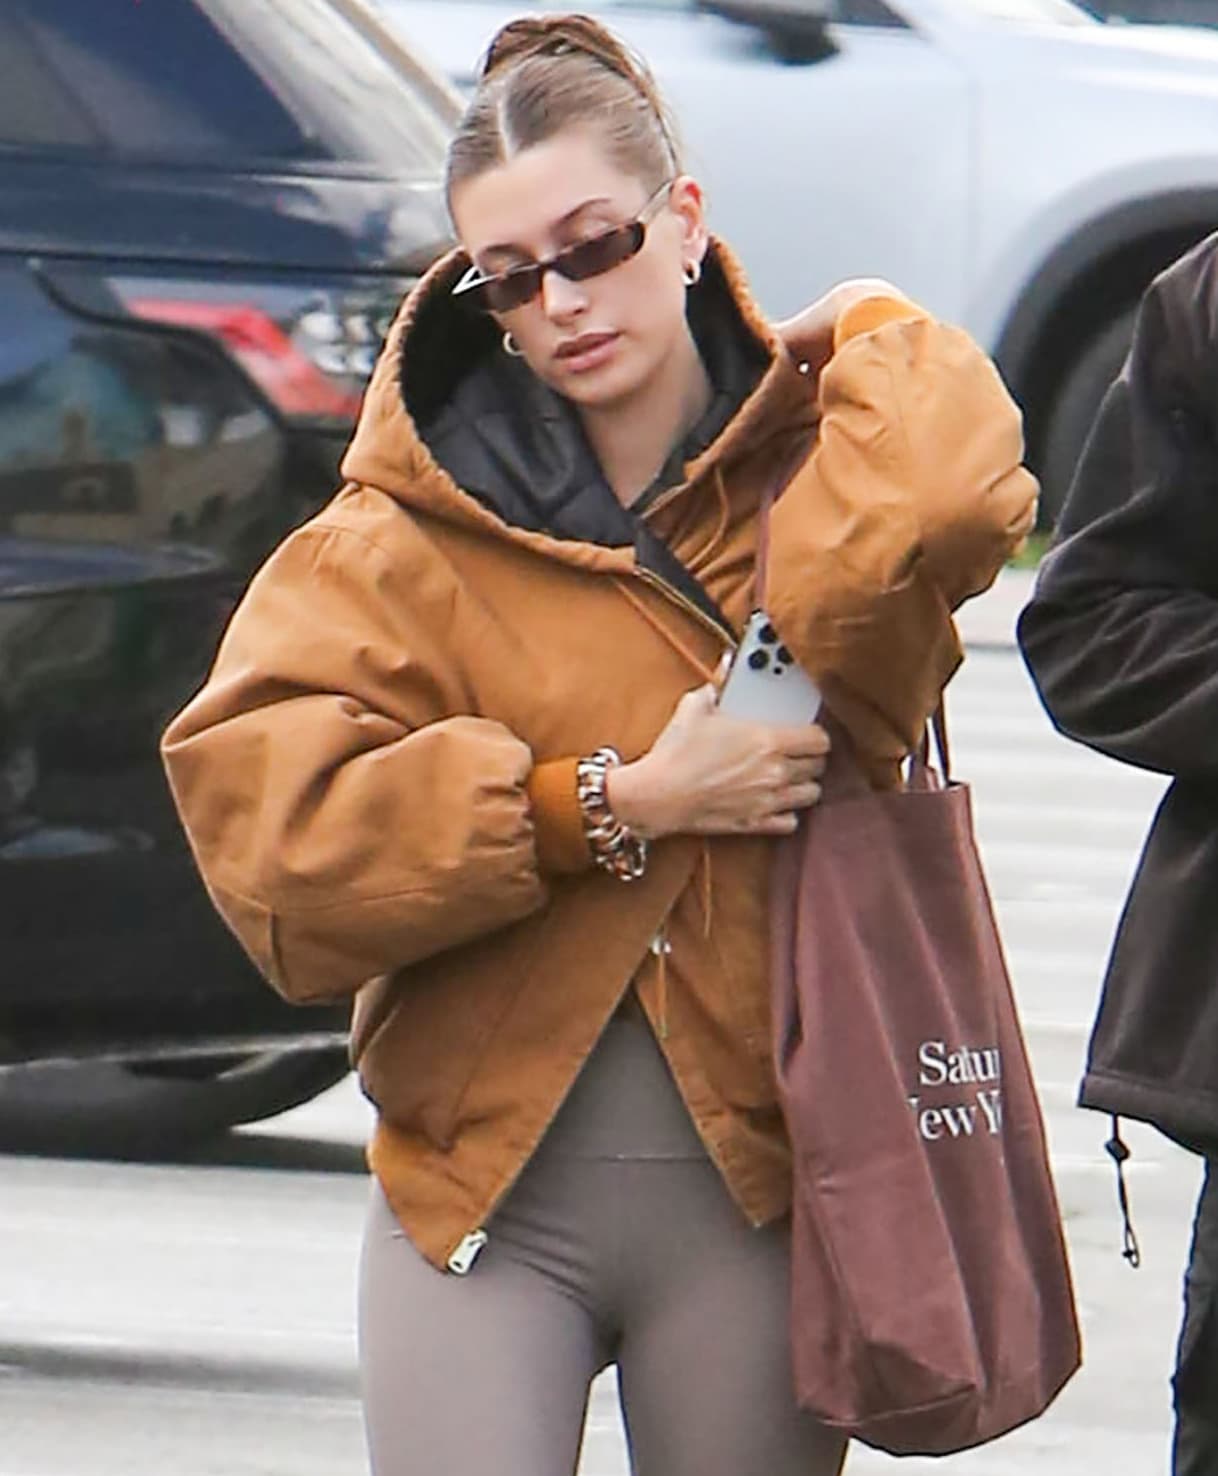 Hailey Bieber ties her hair in a bun with Emi Jay scrunchies and continues with the neutral theme of her look with The Attico tortoiseshell sunnies